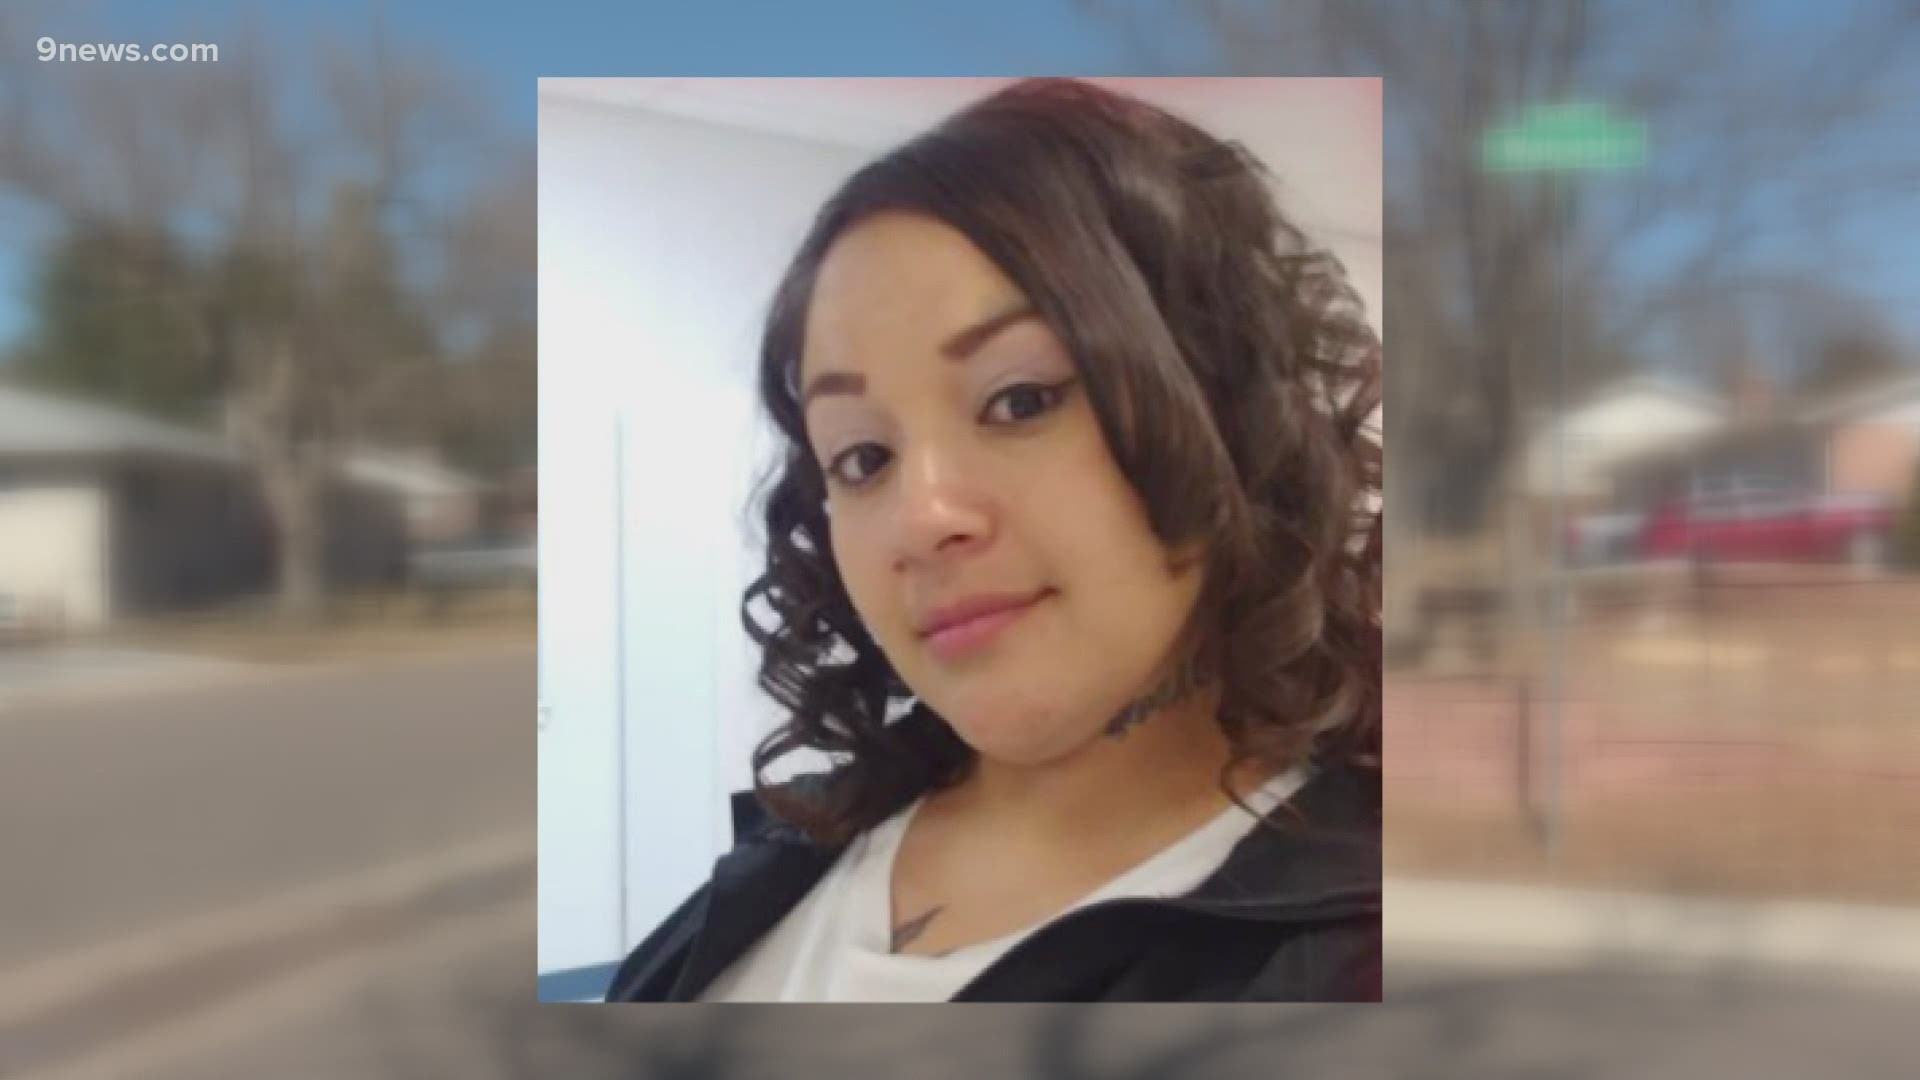 Roxann Martinez, 31, was a witness in the trial against Donthe Lucas, who is accused of murdering Schelling in 2013. DPD said they don't think there is a connection.